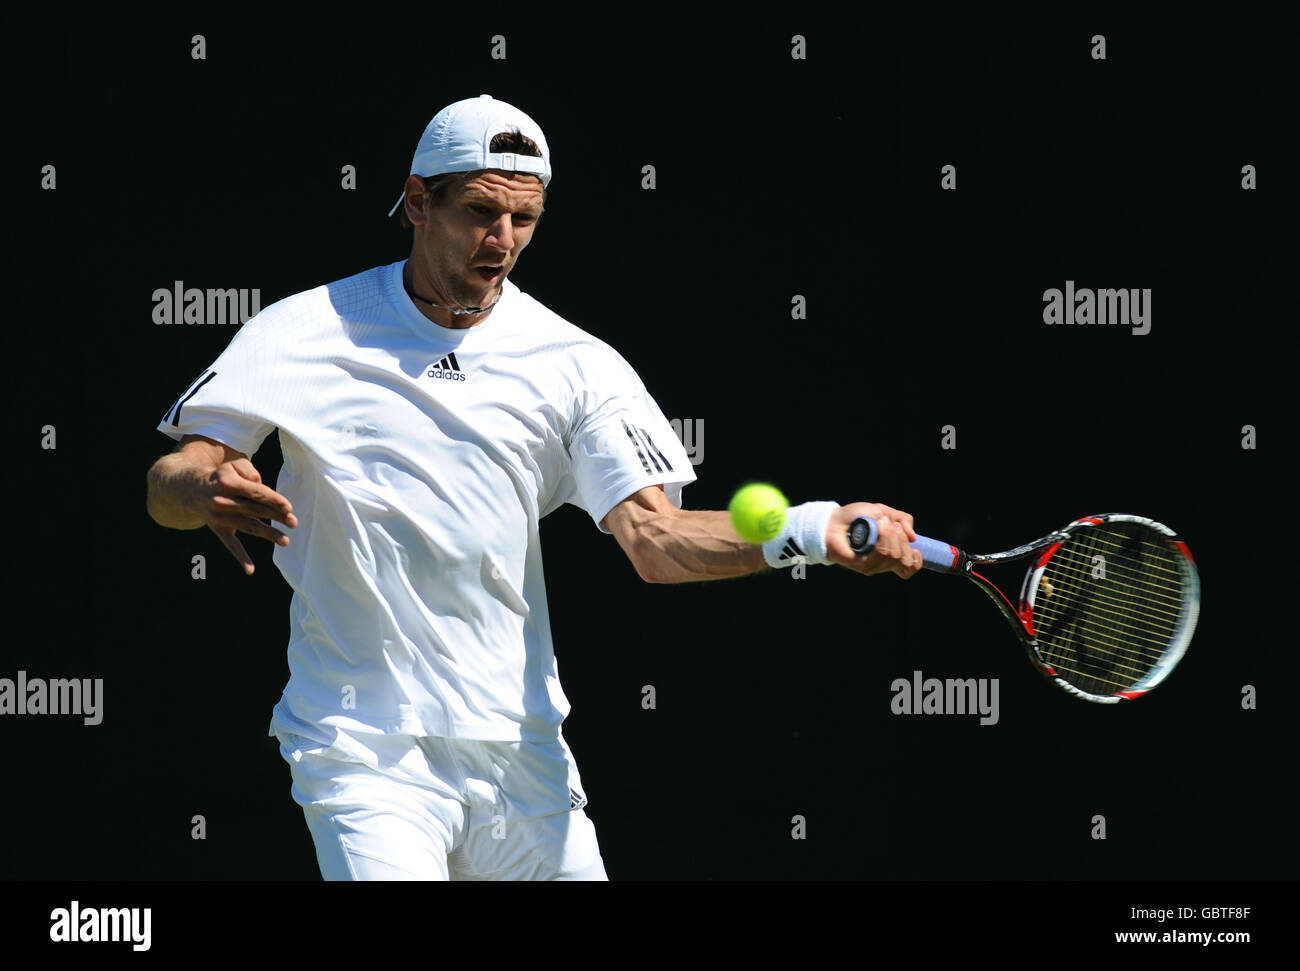 France's Paul-Henri Mathieu in action against Portugal's Frederico Gil during the 2009 Wimbledon Championships at the All England Lawn Tennis and Croquet Club, Wimbledon, London. Stock Photo